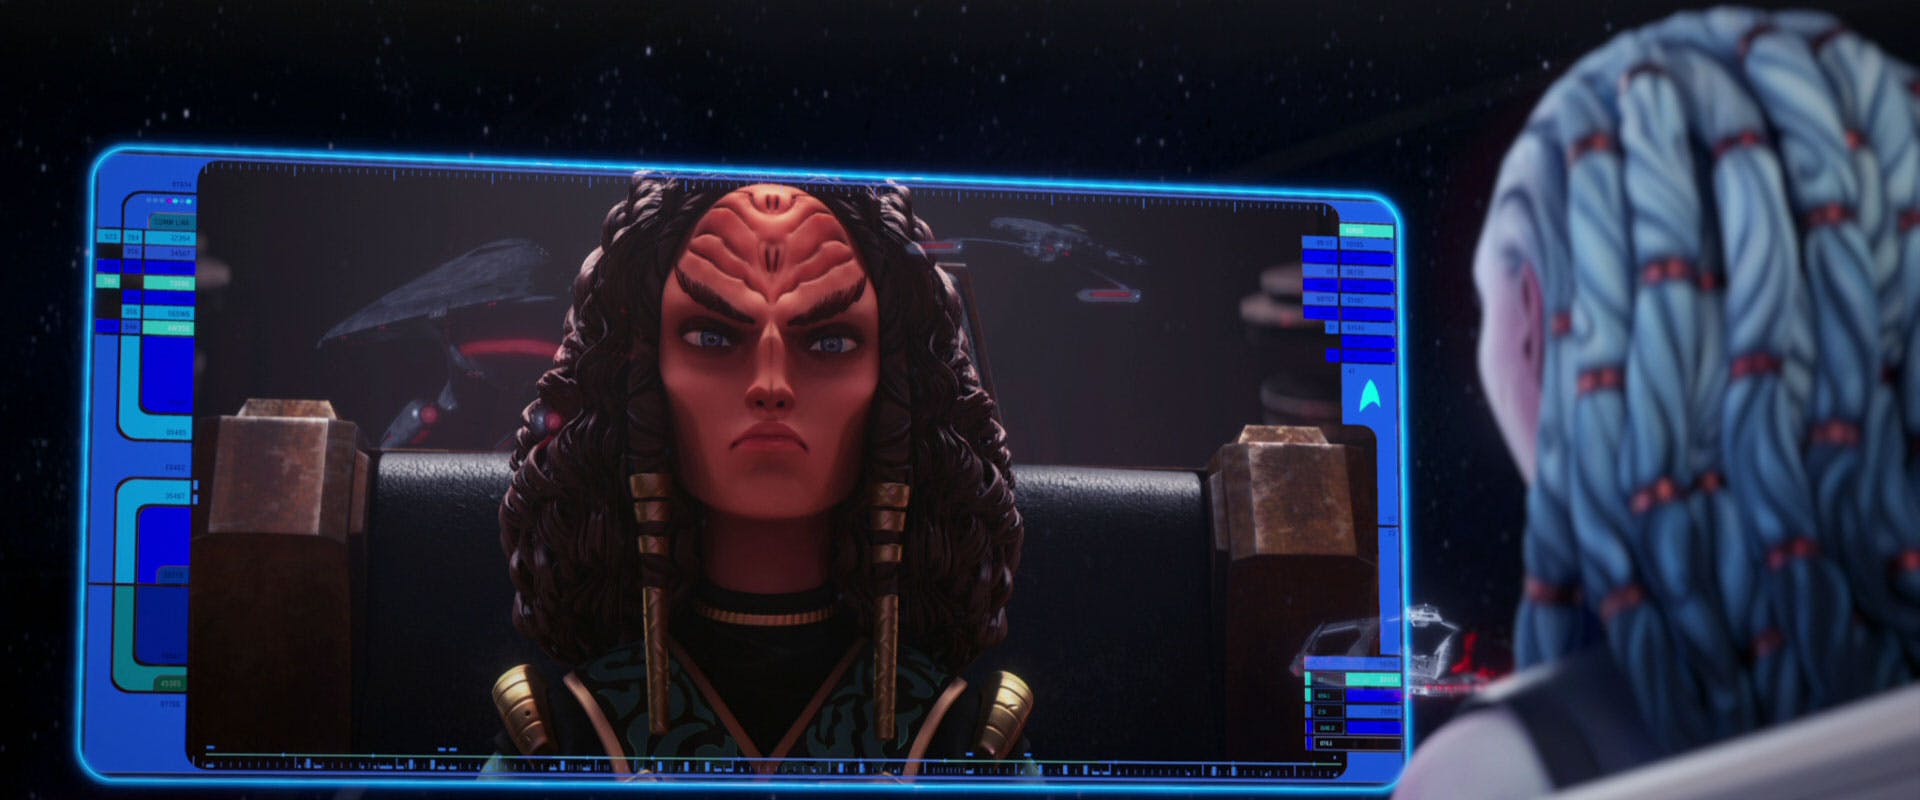 As Gwyn sits in the center seat, with universal translators down, she converses with a Klingon commanding officer in 'Supernova, Part 1'